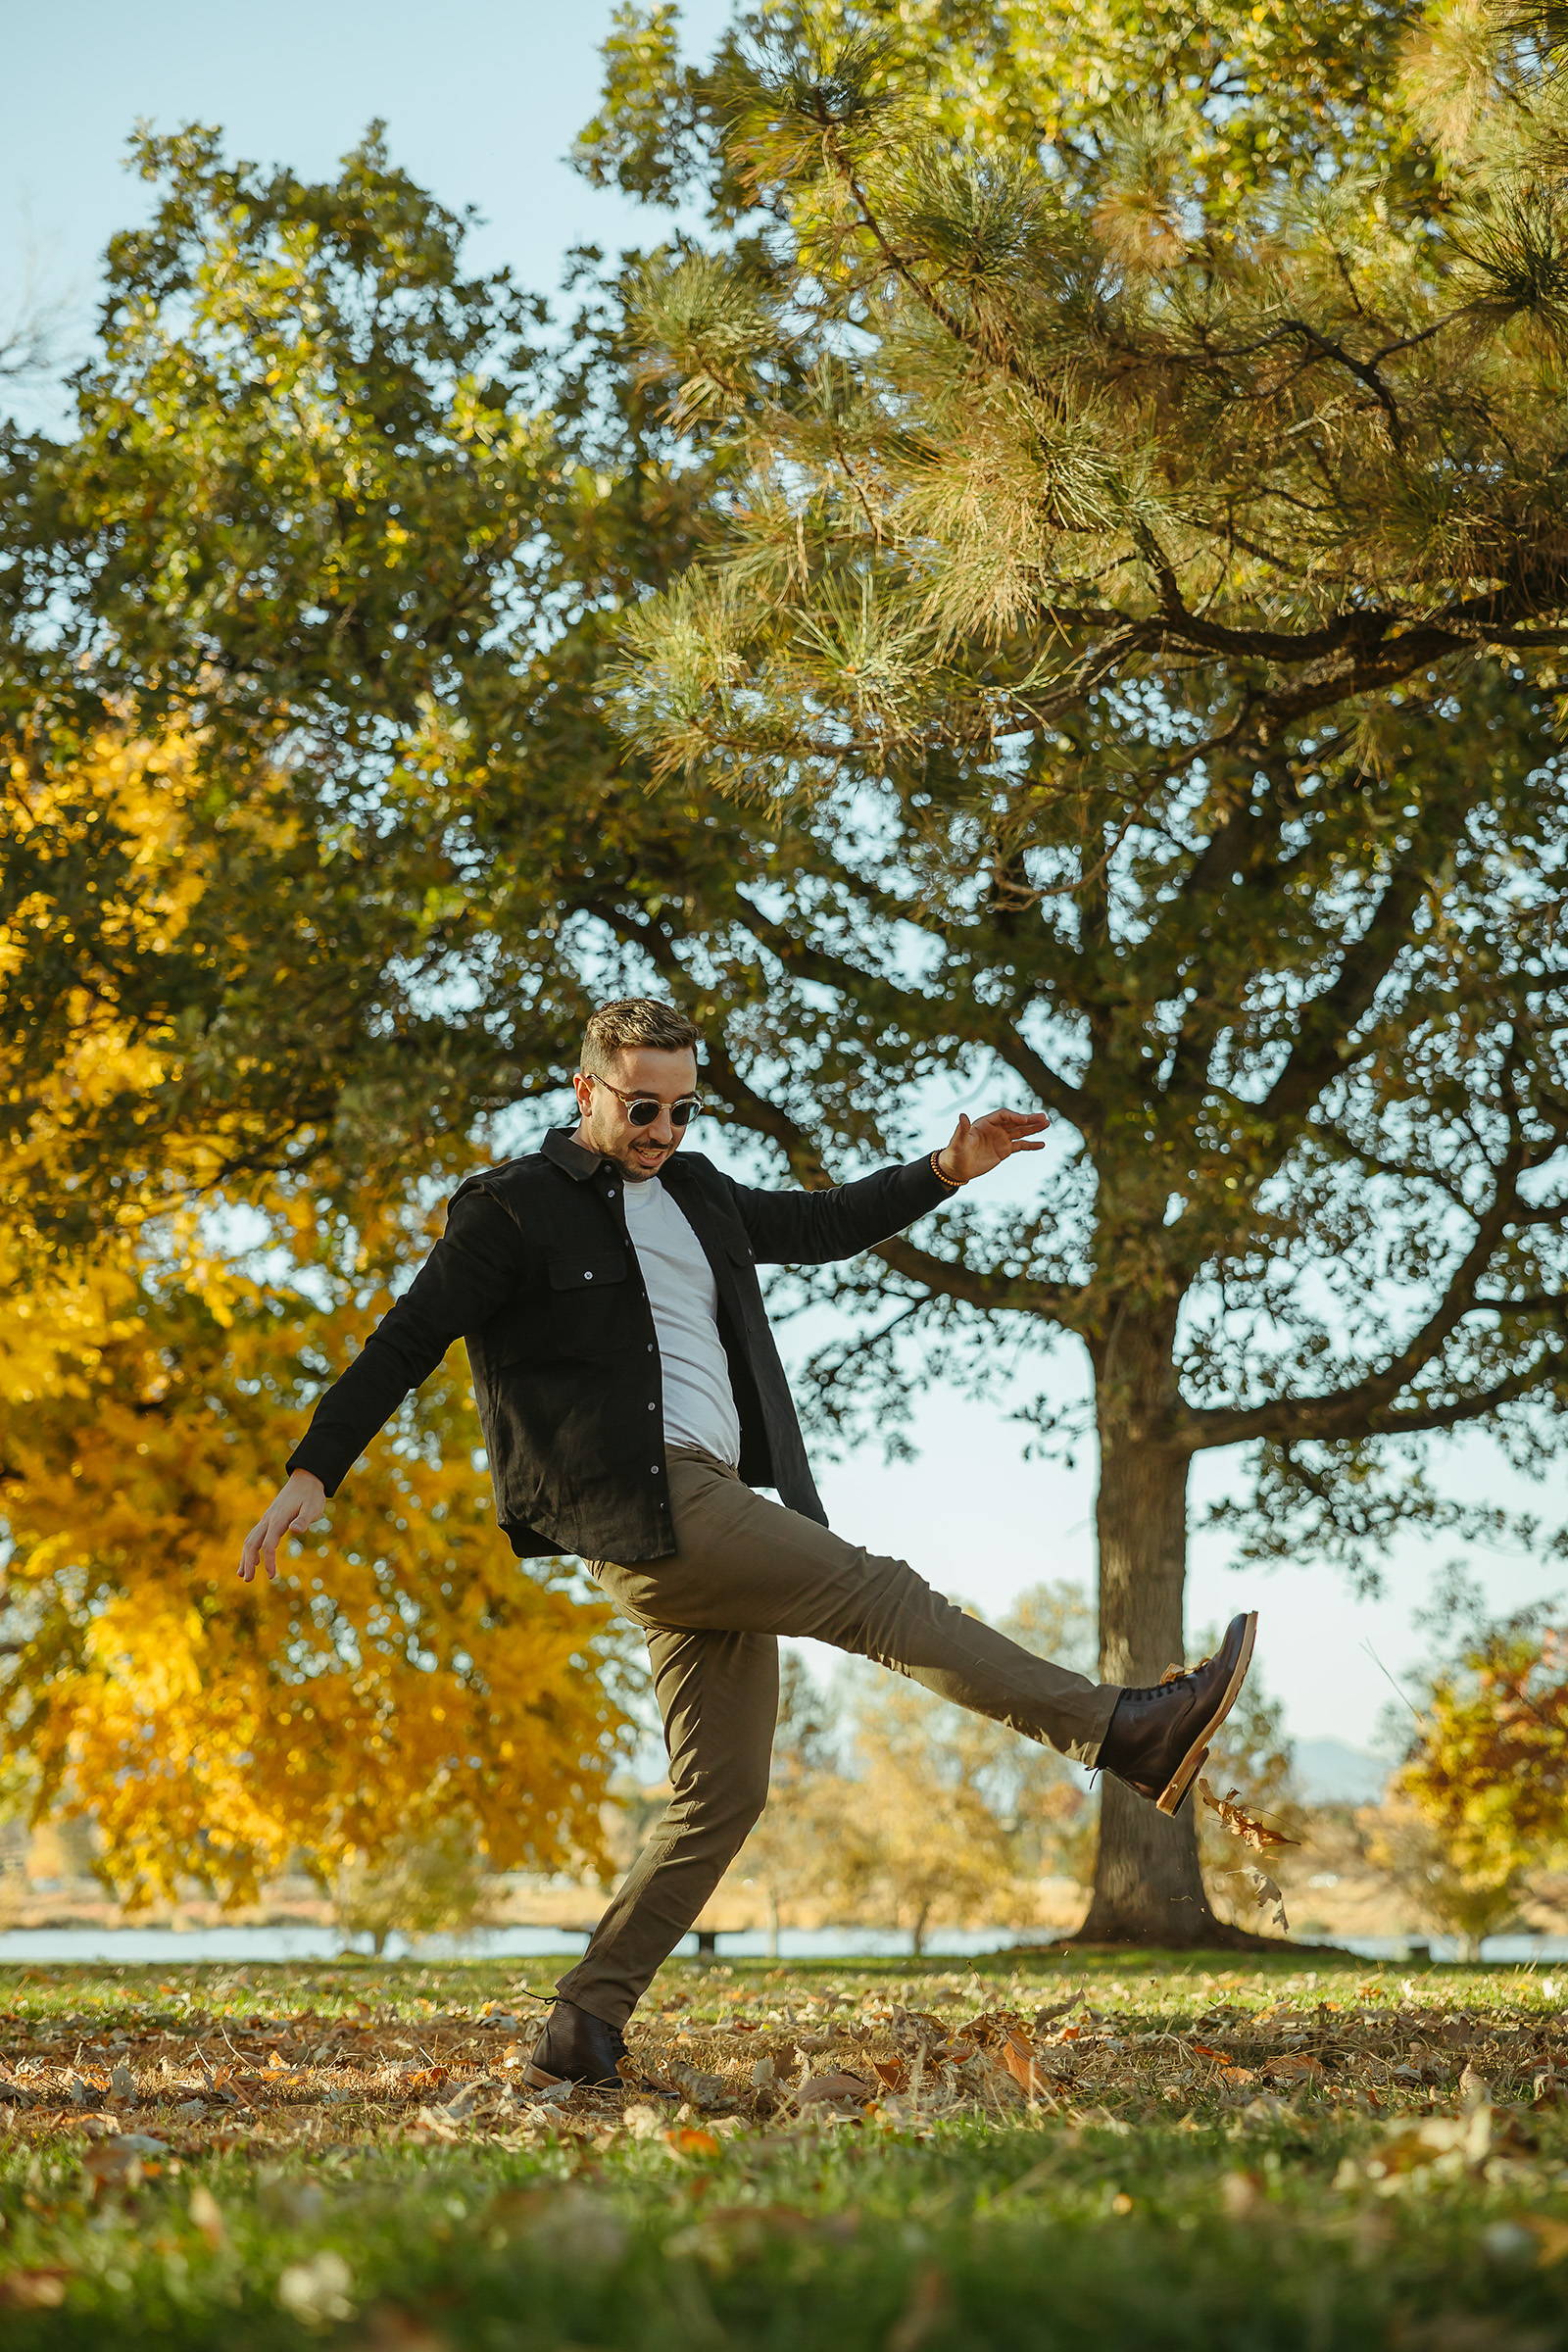 Man dancing in the autumn leaves wearing brown boots, white t shirt, a black overshirt, and olive chinos from Under510.com